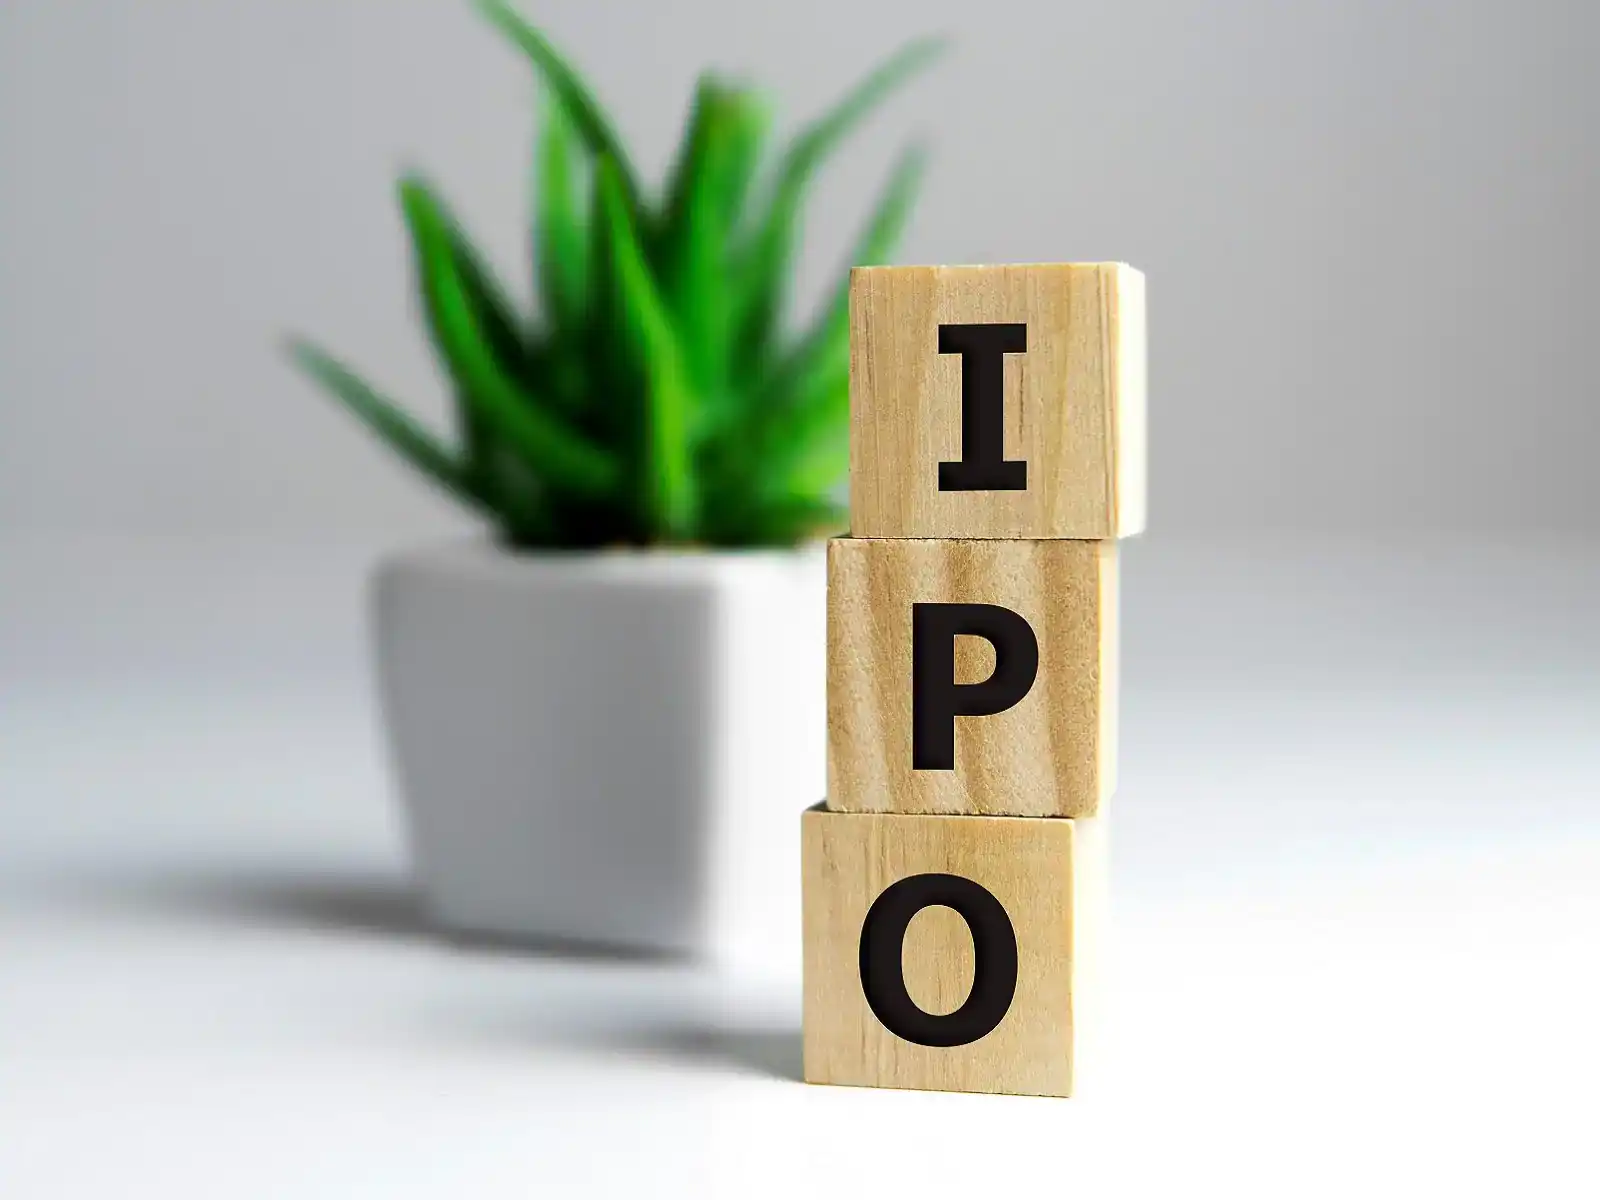 Egypt targets up to $5B in proceeds from IPO program by June 2024

